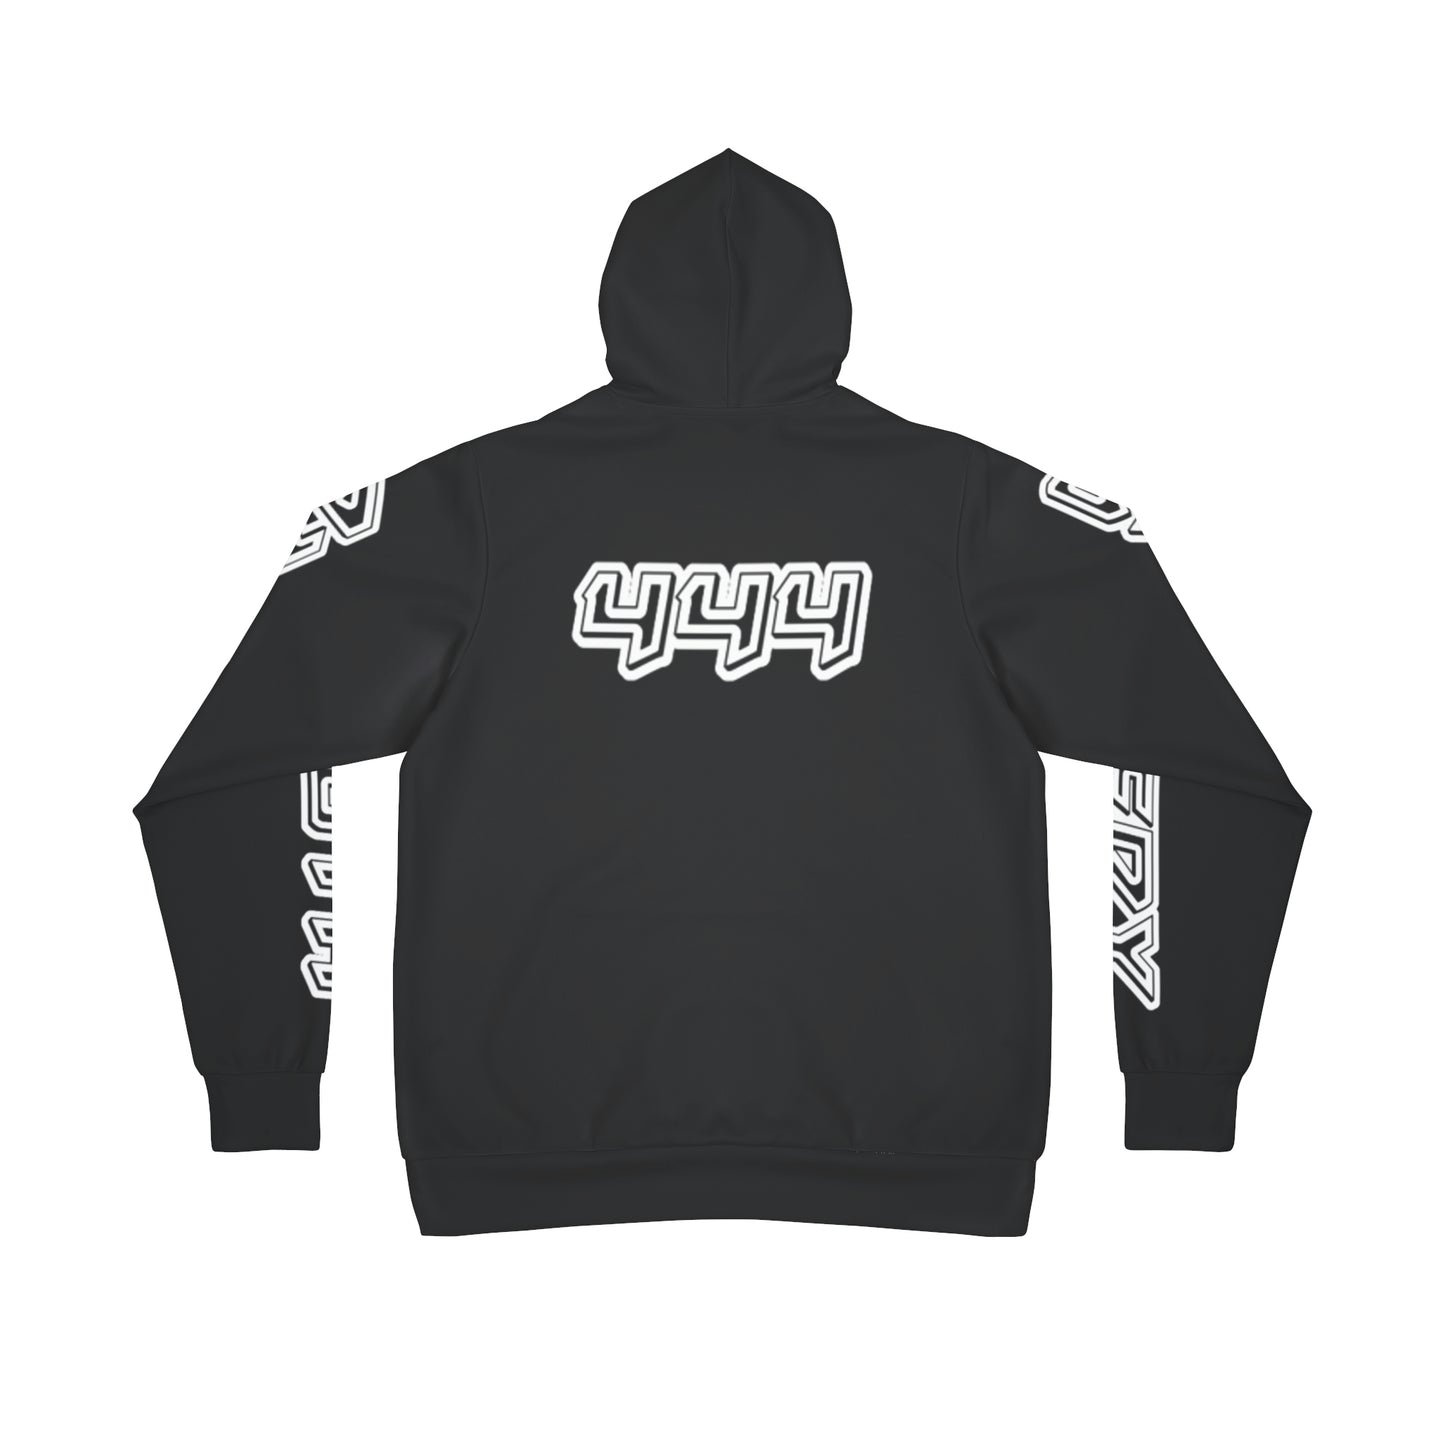 Atziluth Gallery " Moto-X" Hoodie